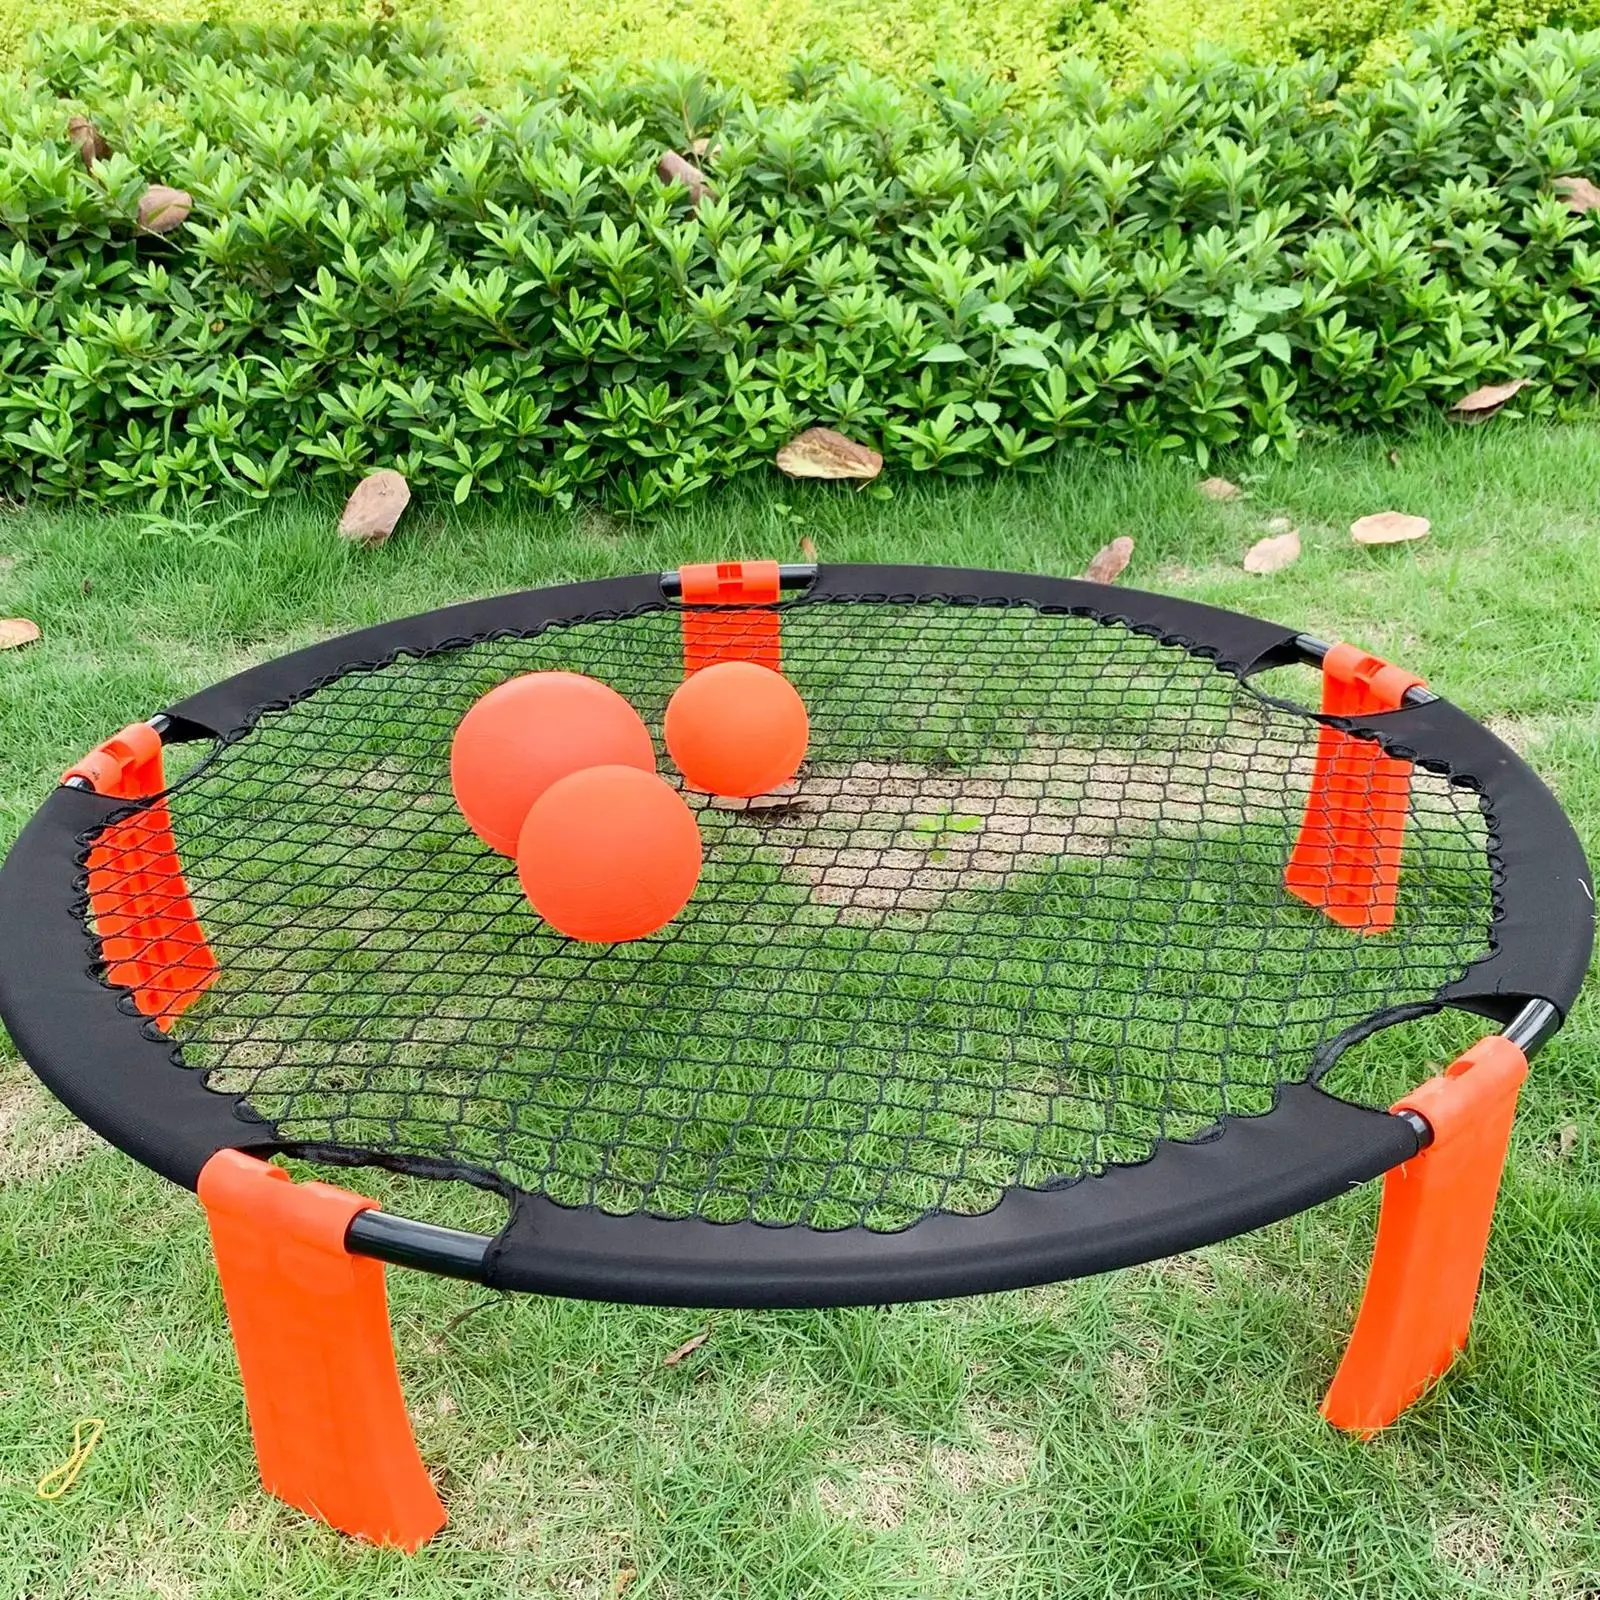 Volleyball Spike Game Set with 3 Balls Volleyball Net Lawn Fitness Equipment